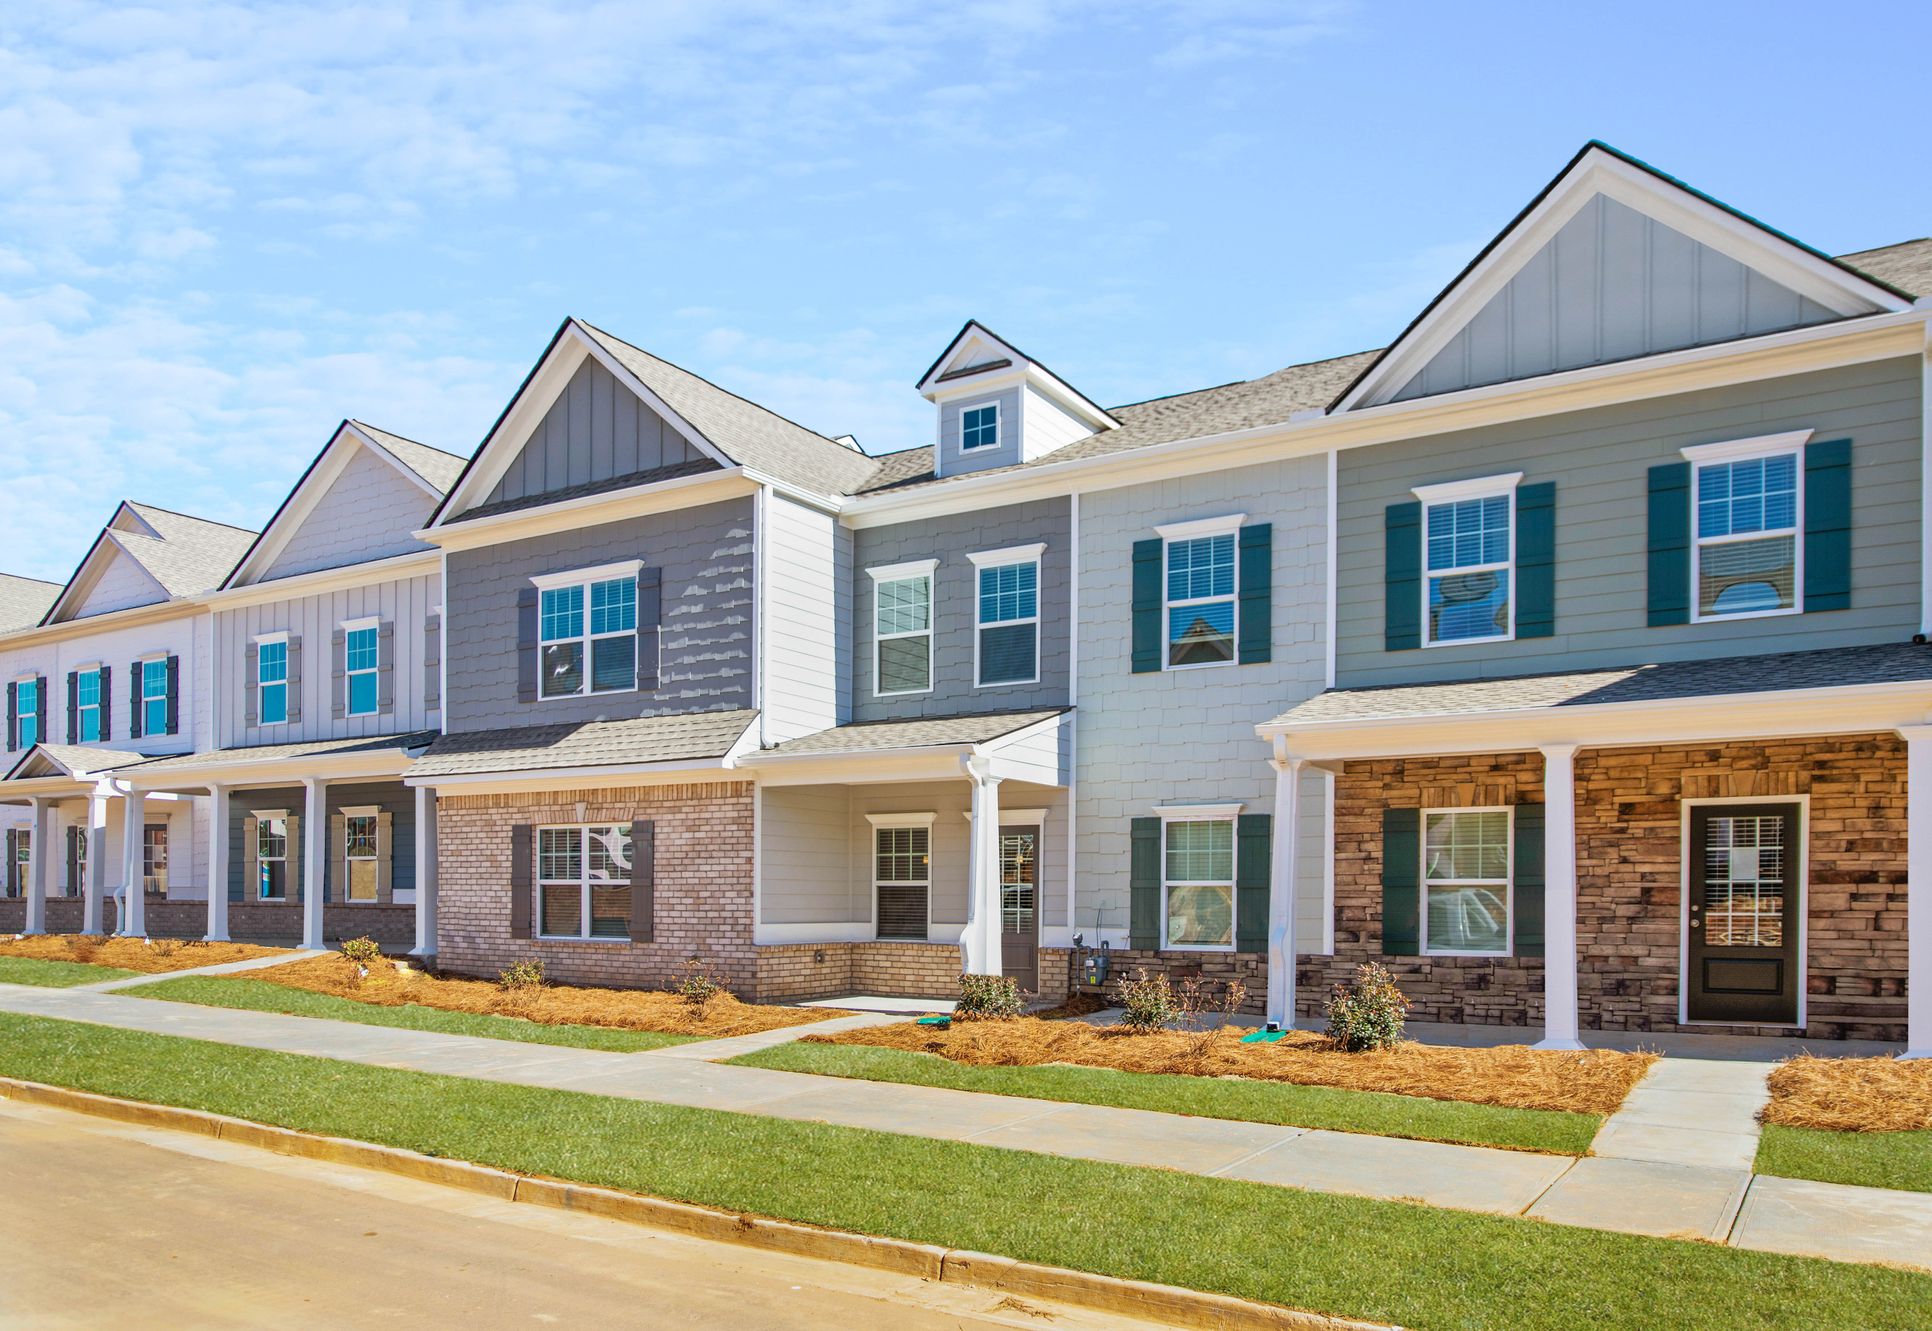 Carson and Sussex Townhome Coming to Lebanon, TN!:Carson and Sussex Townhome Coming to Lebanon, TN!